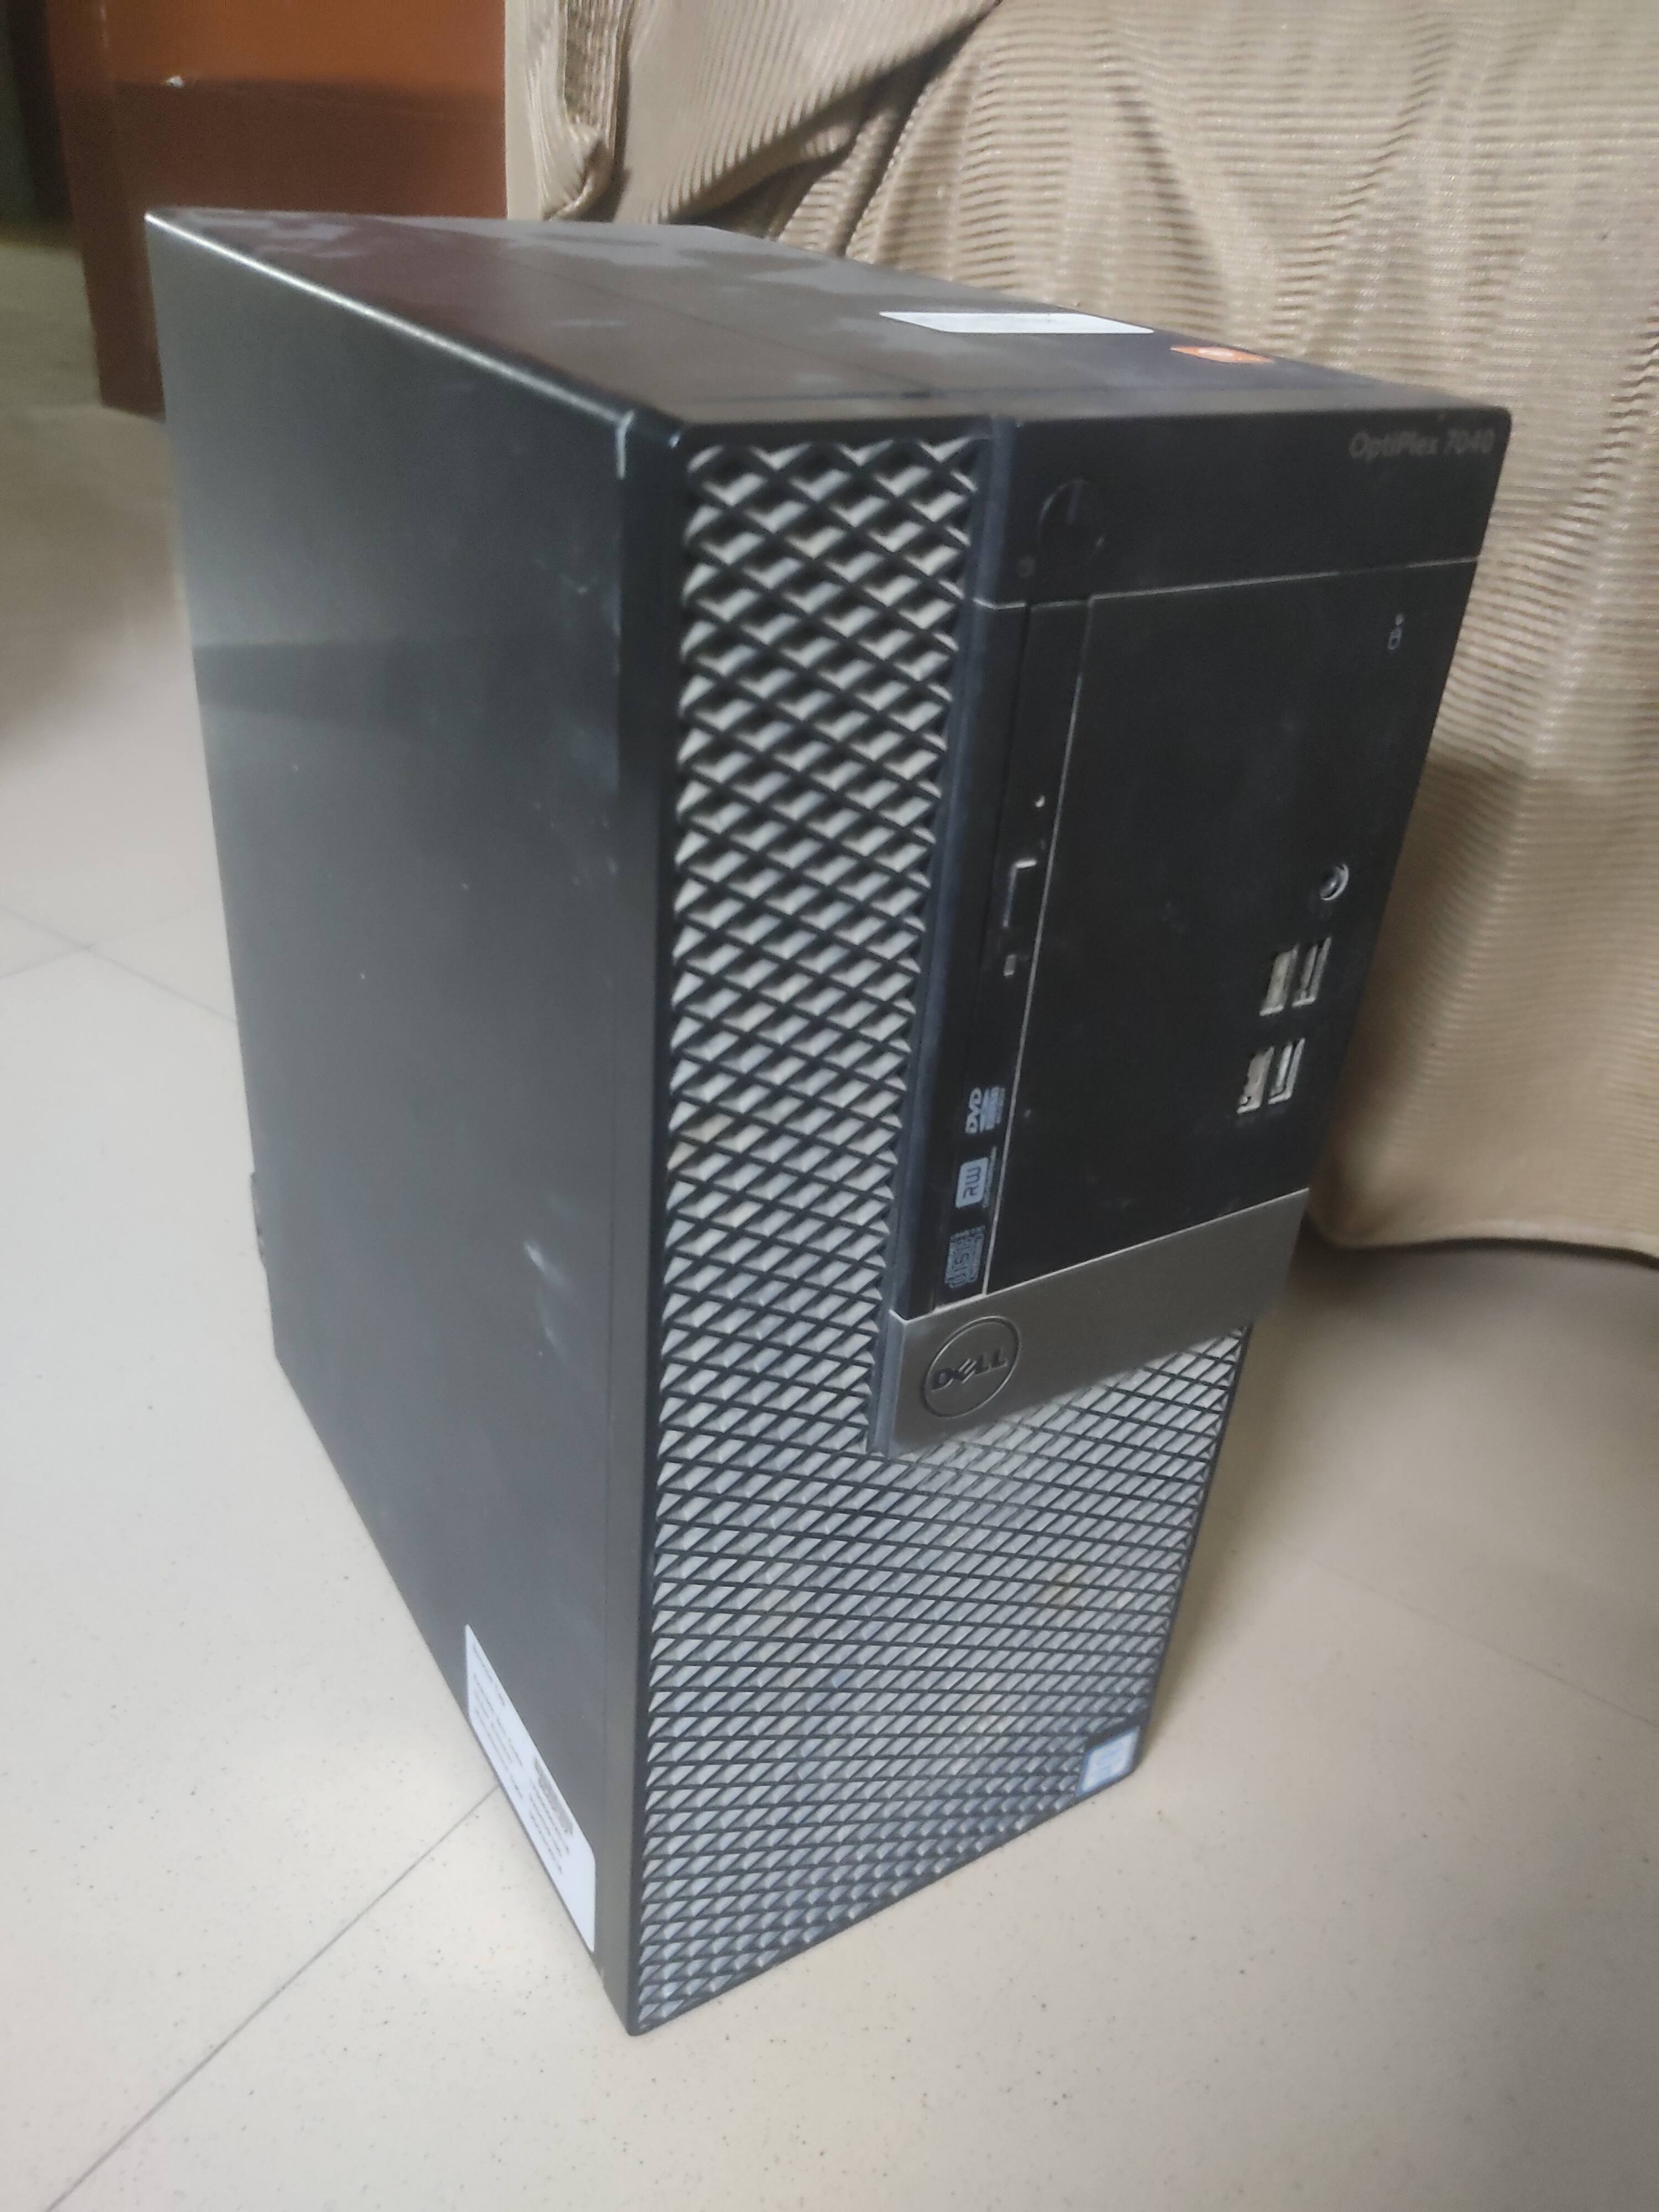 Need urgent help for upgrading dell optiplex 7040 mini tower - New Builds  and Planning - Linus Tech Tips